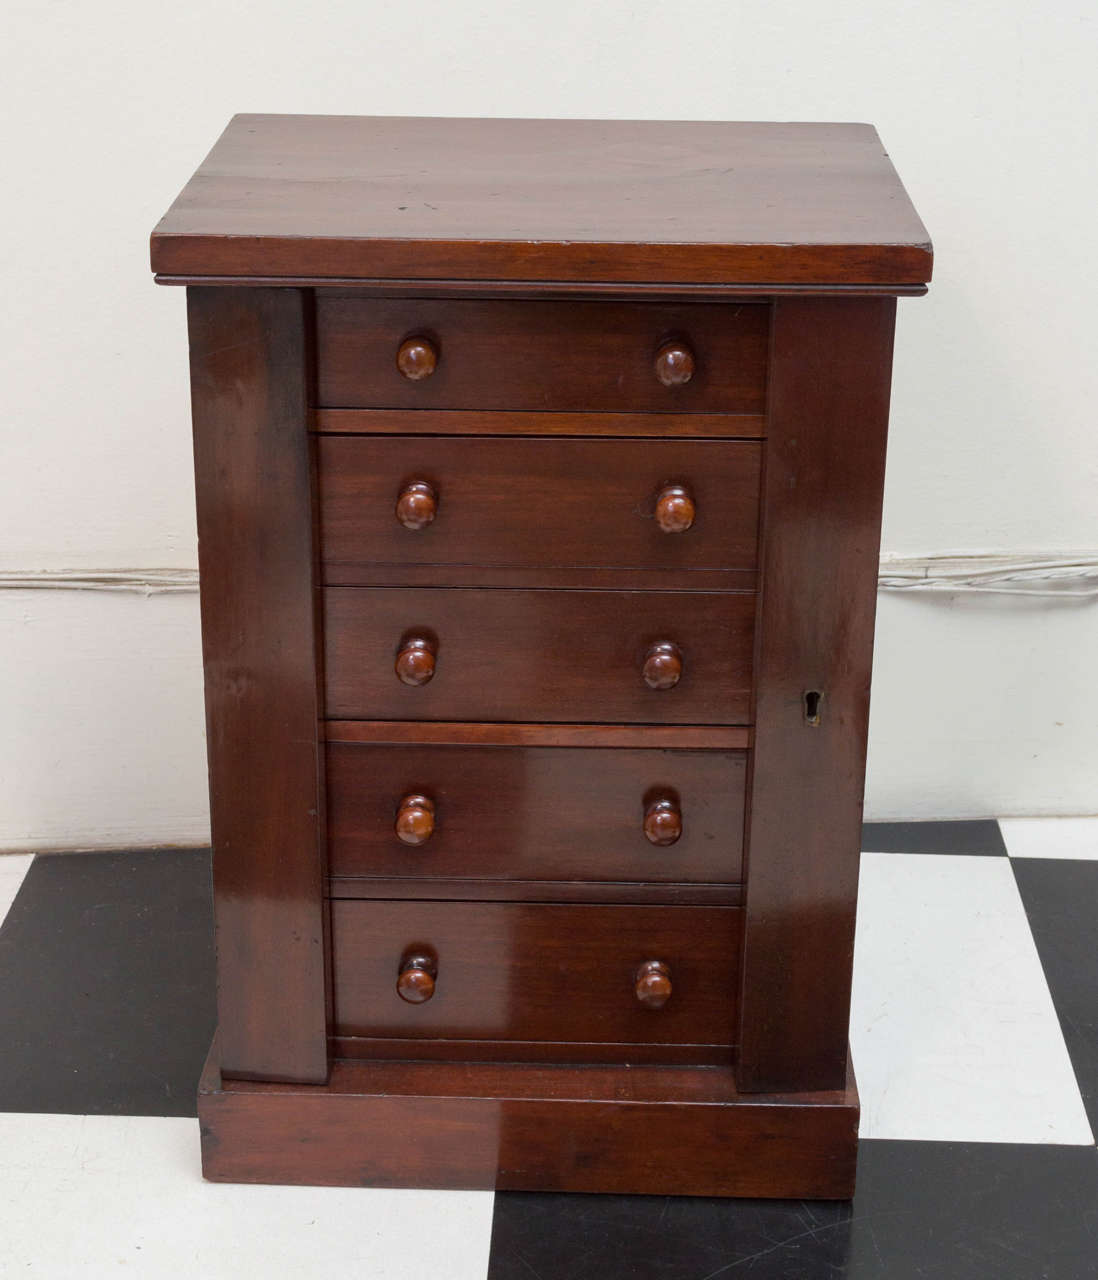 19th c. English mahogany miniature collector's chest with lock side flaps. Five graduated drawers and a plinth base. Brass locks and a steel key.